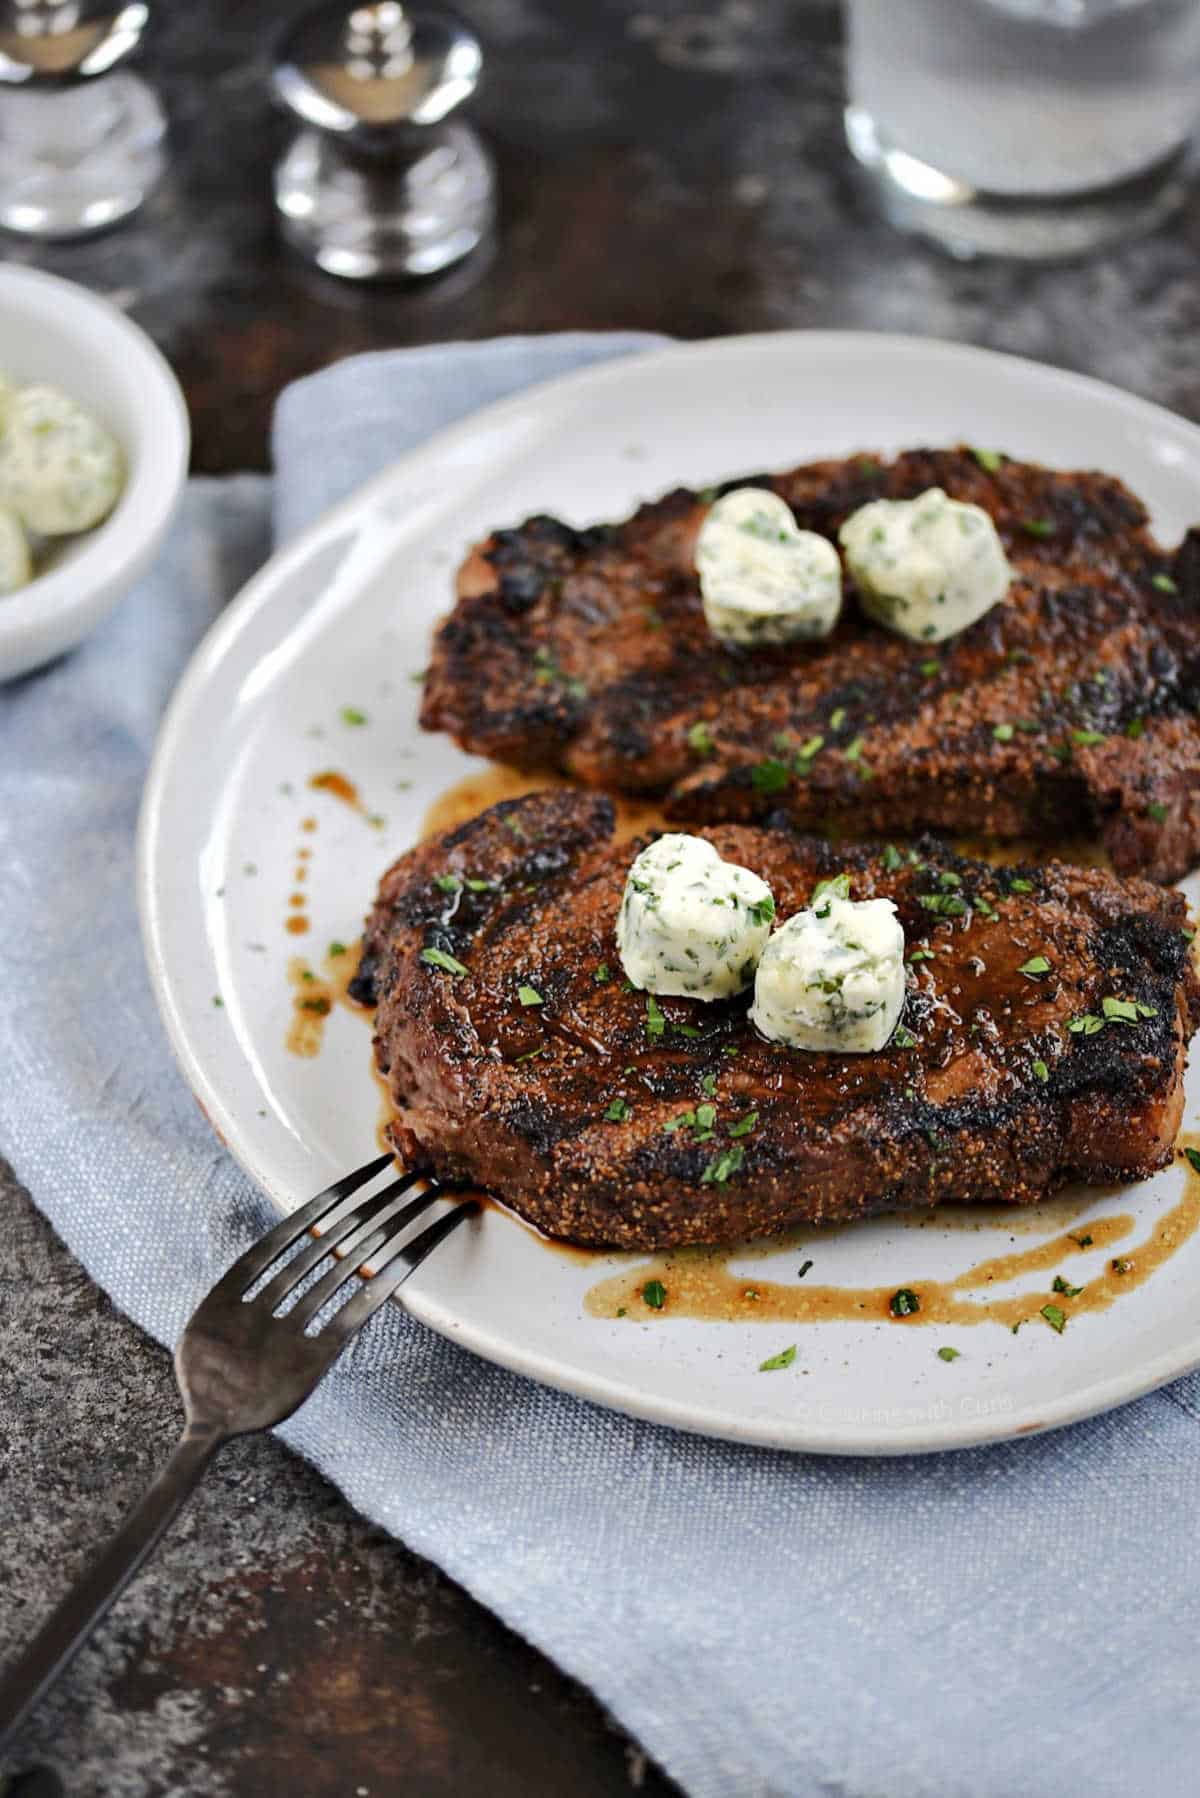 Two perfectly grilled ribeye steaks with hart shaped herb butter on top.